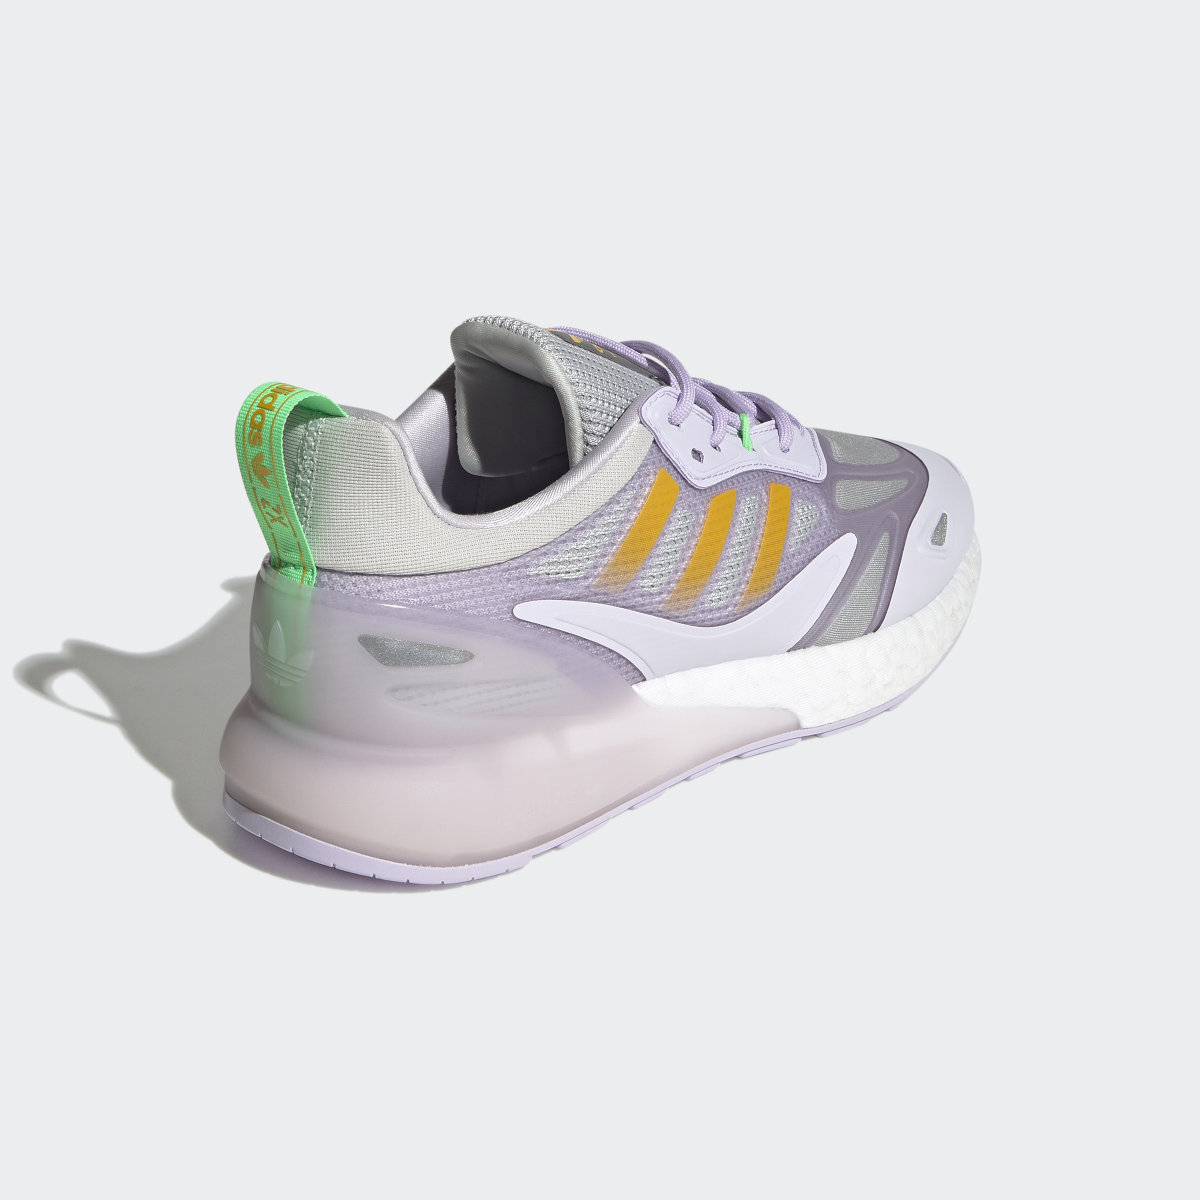 Adidas ZX 2K Boost 2.0 Shoes. 6